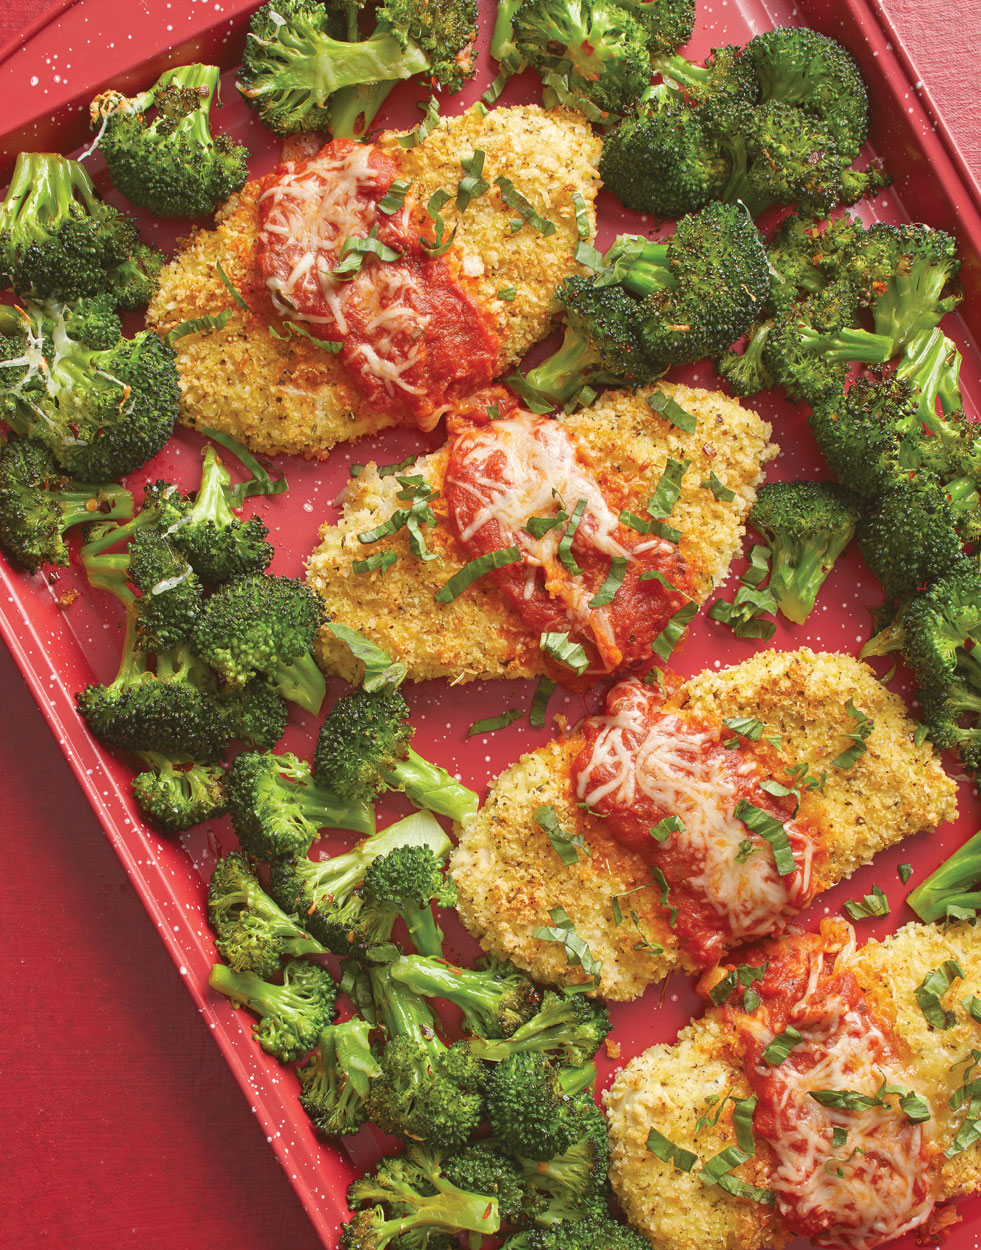 Sheet Pan Chicken Parmesan with broccoli florets